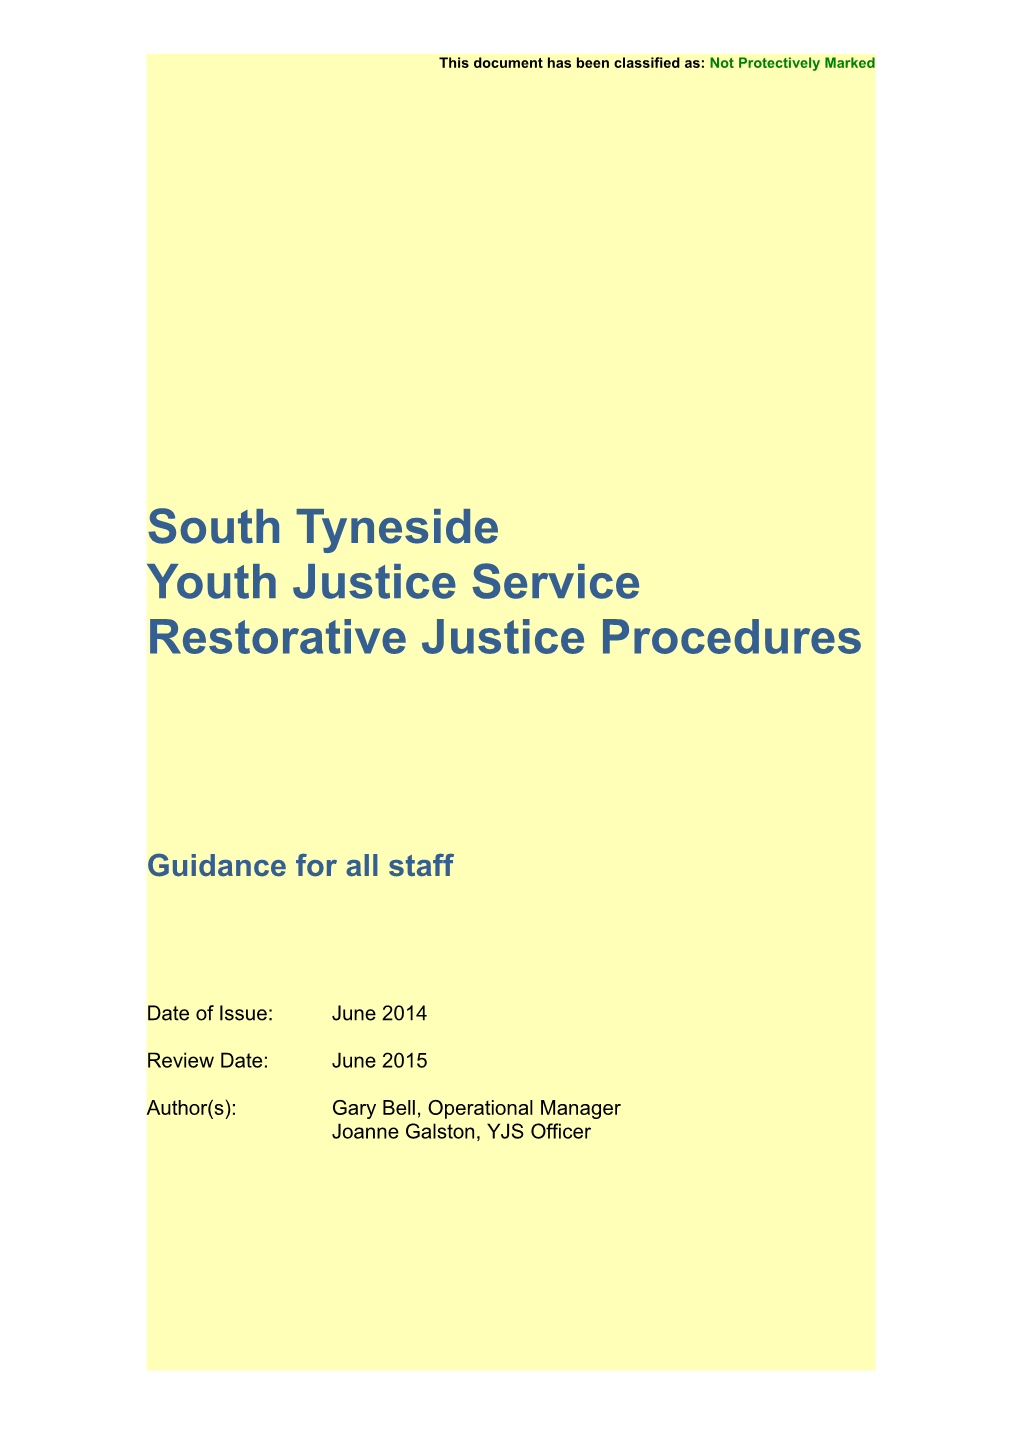 South Tyneside Youth Justice Service Restorative Justiceprocedures